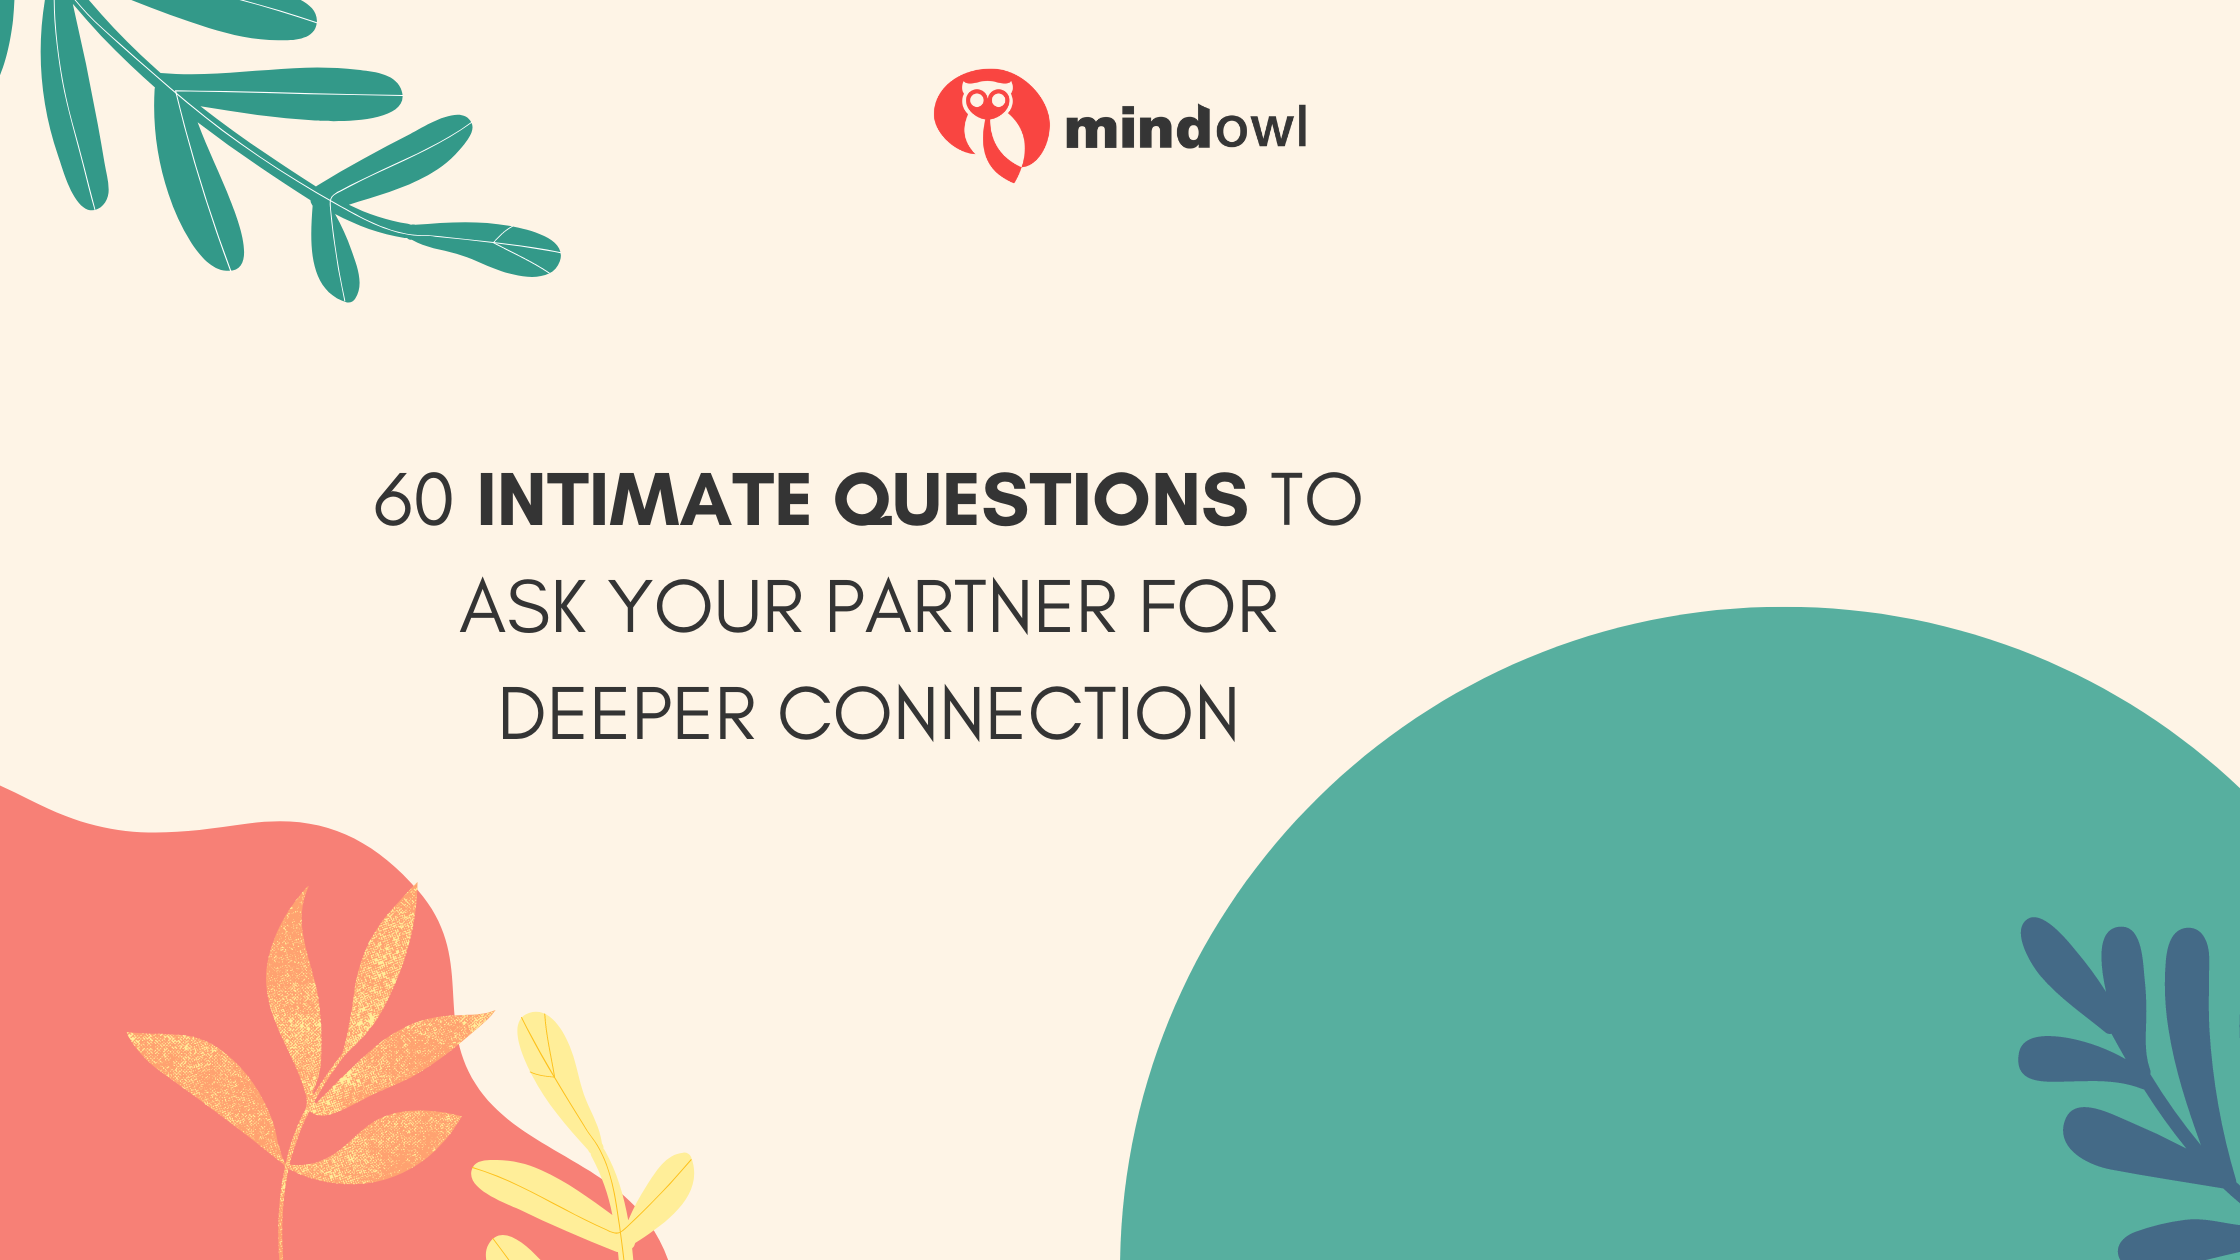 60 Intimate Questions To Ask Your Partner For Deeper Connection